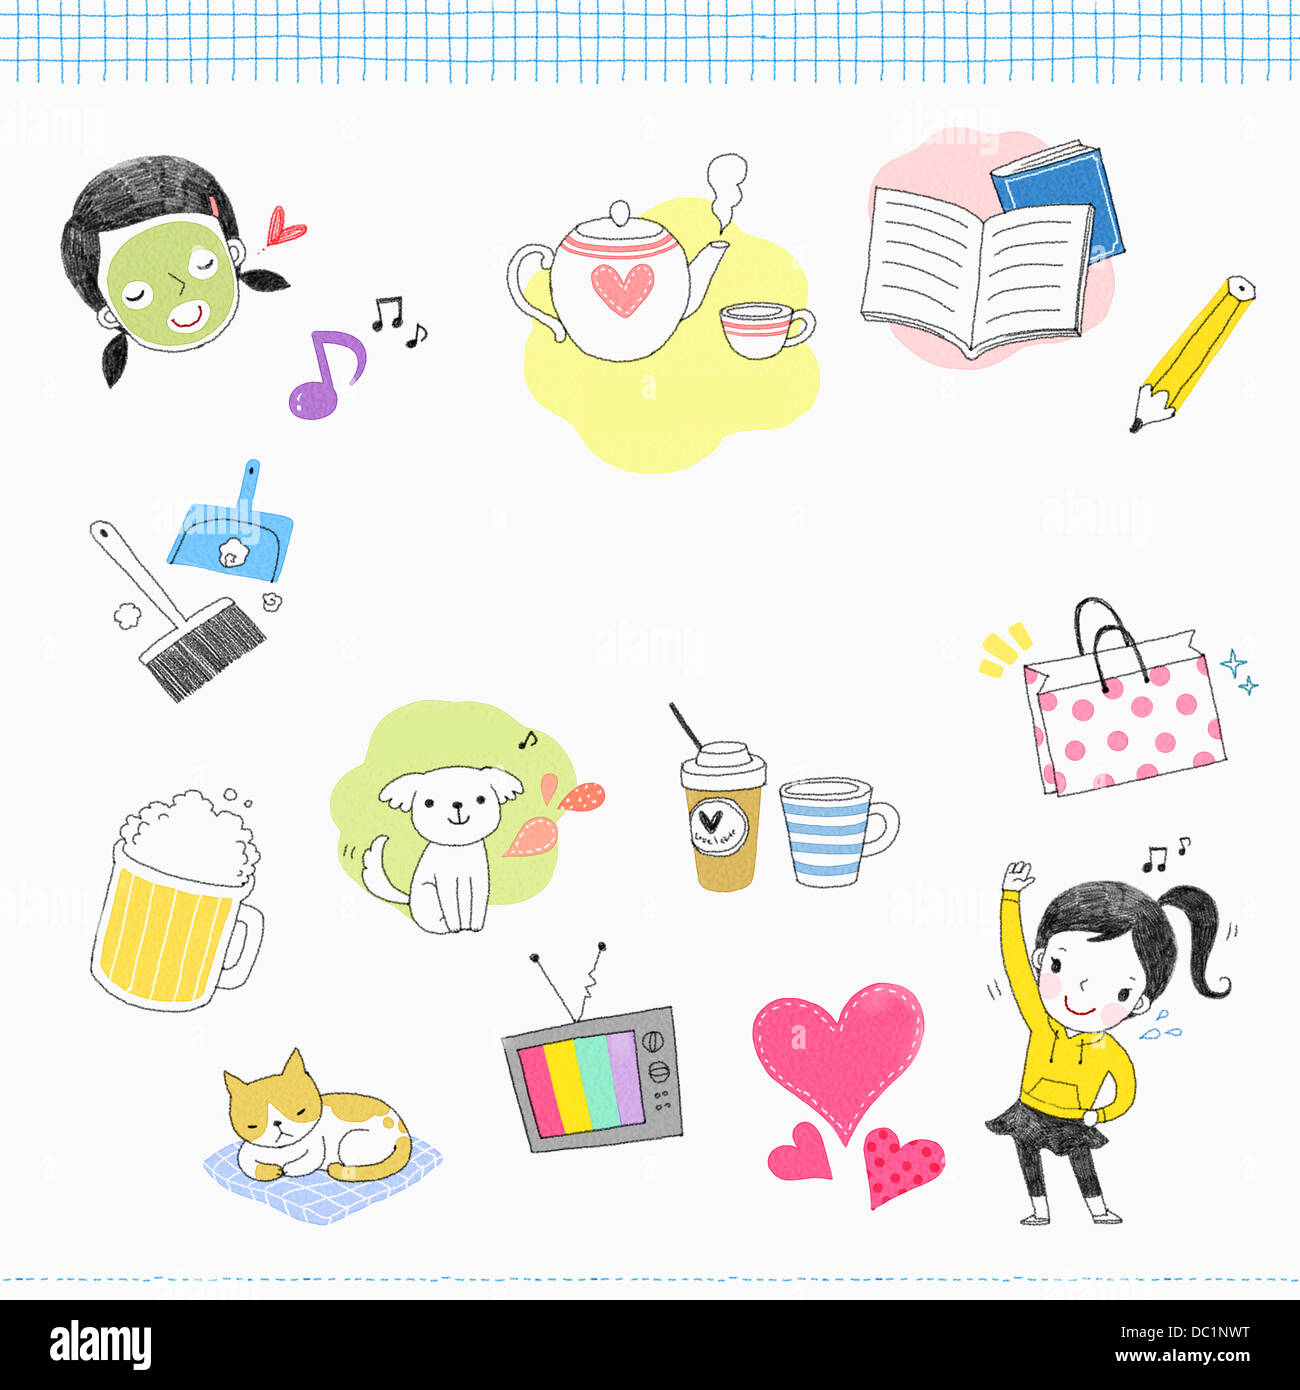 illustration set of icons related to leisure Stock Photo